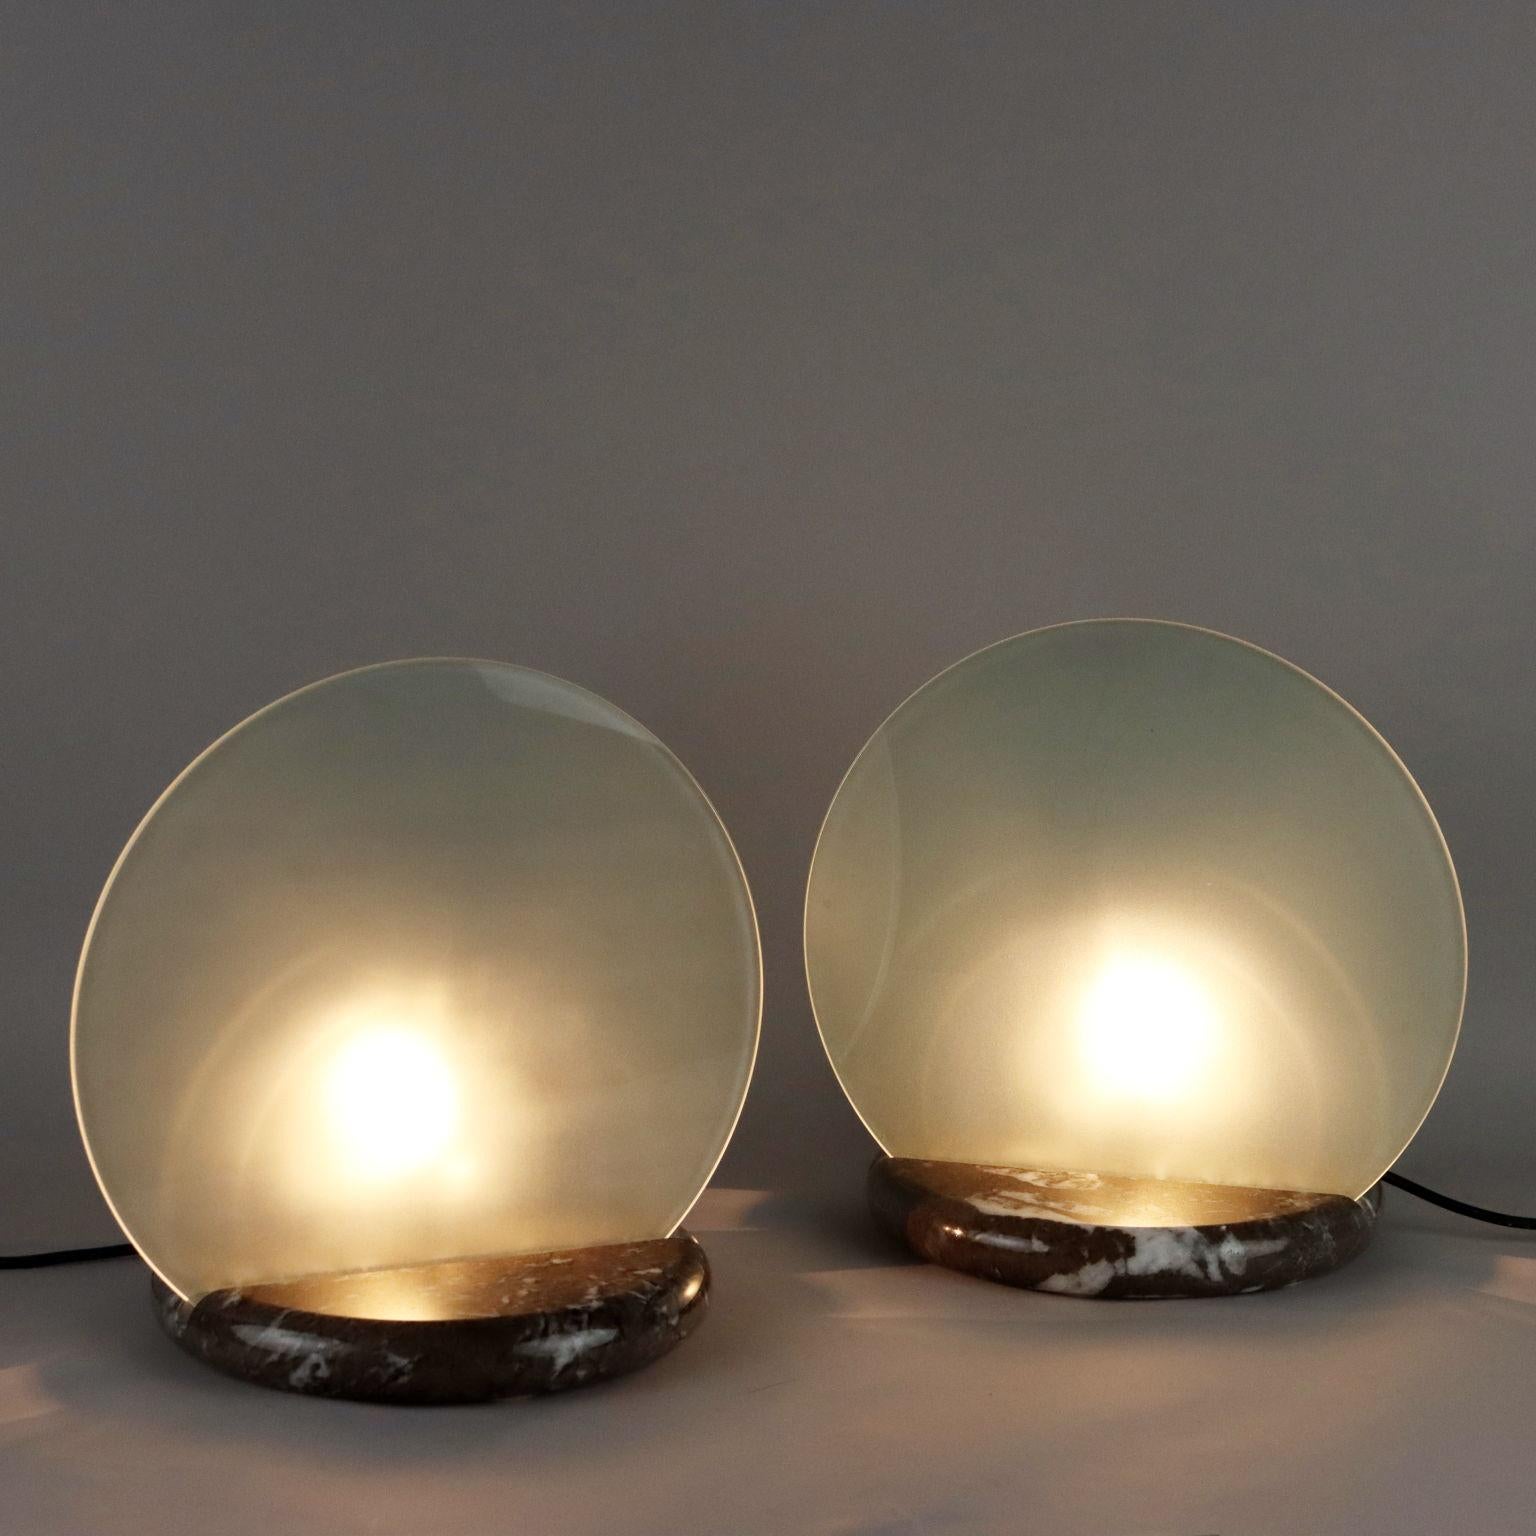 Pair of table lamps, marble base, aluminum, glass. Good conditions.